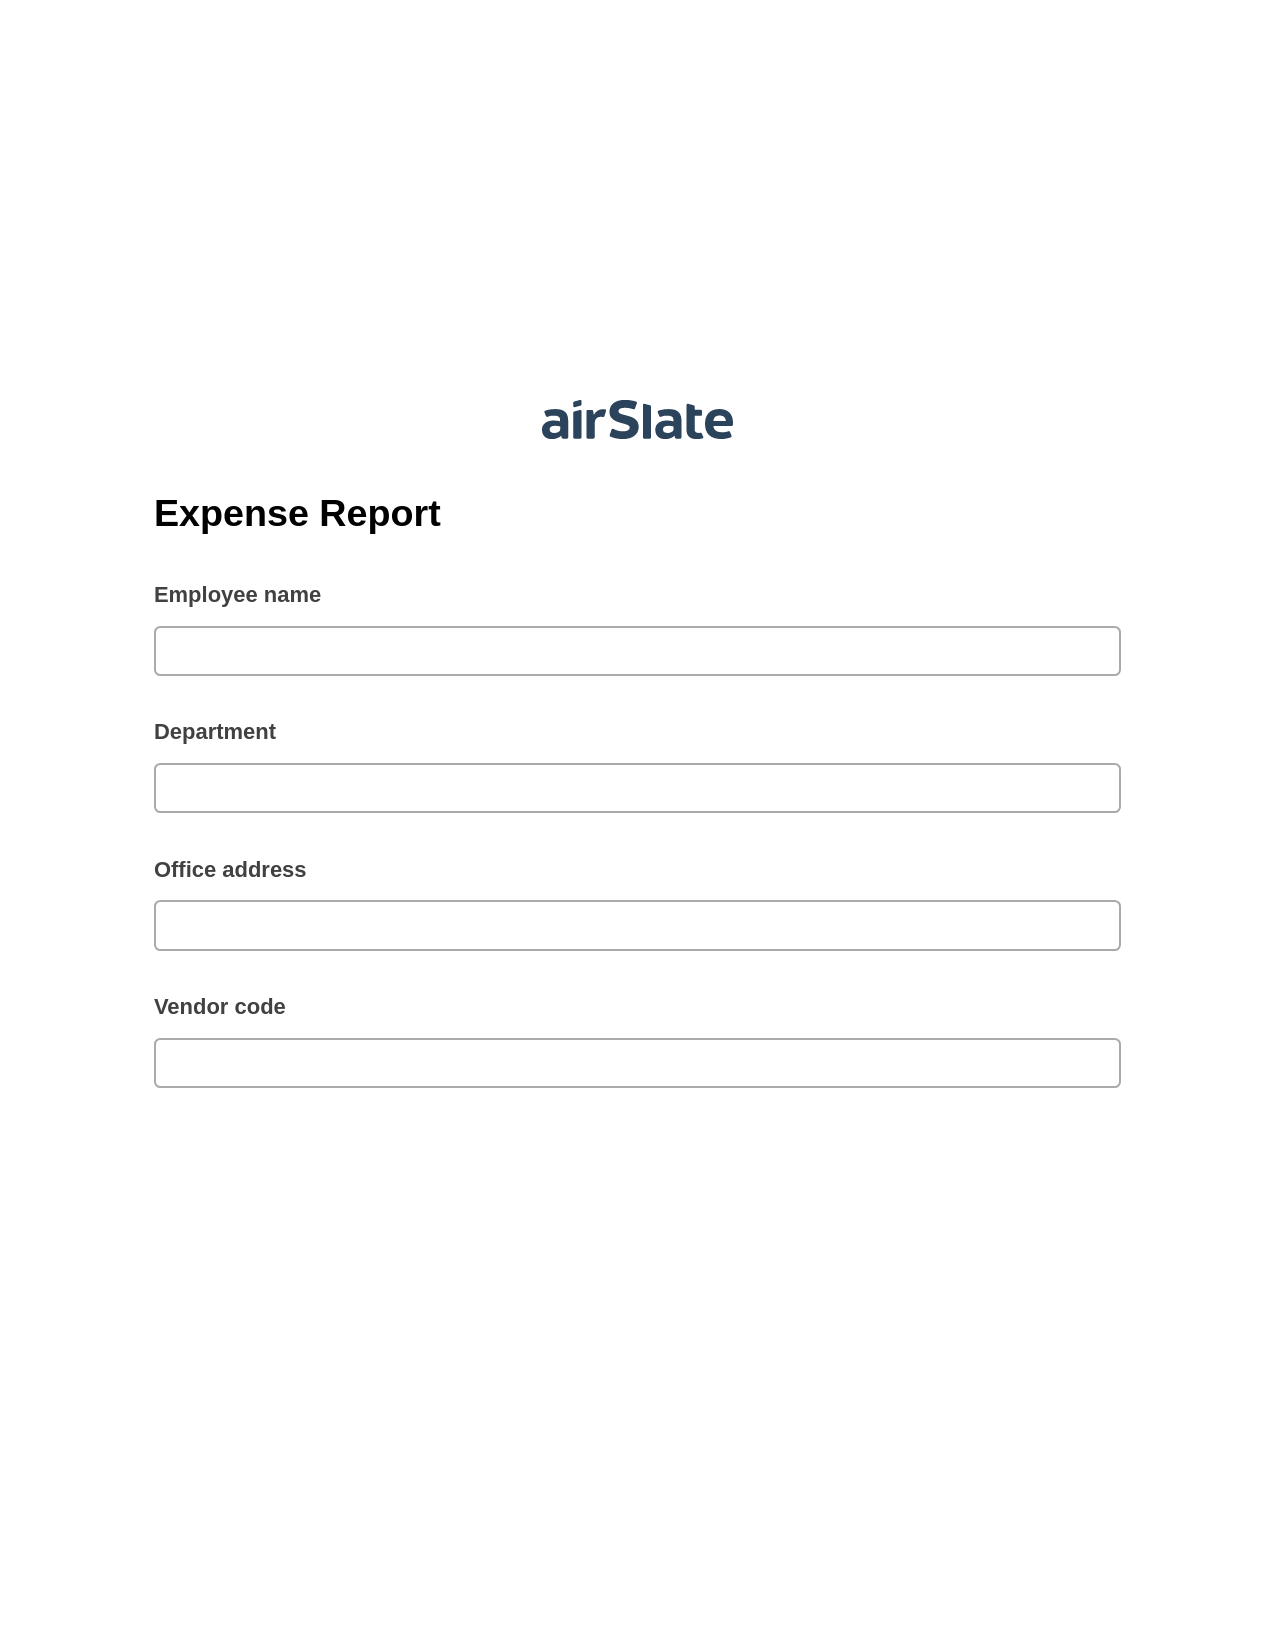 Expense Report Pre-fill from Litmos bot, Lock the slate bot, Export to Excel 365 Bot